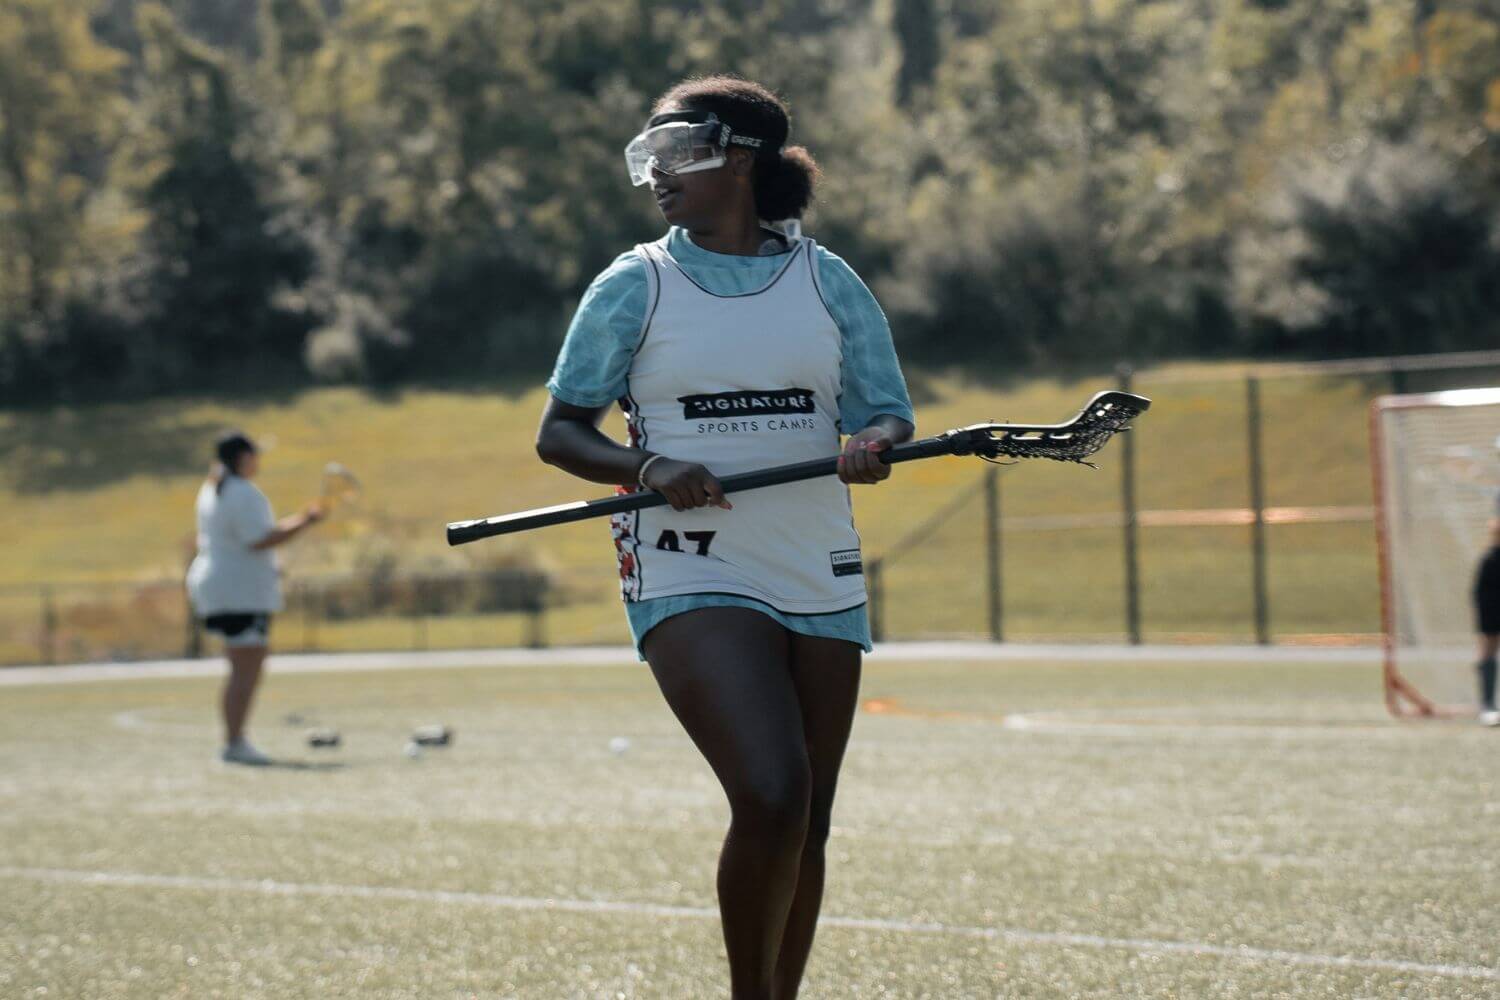 Female lacrosse player walking with her lacrosse stick